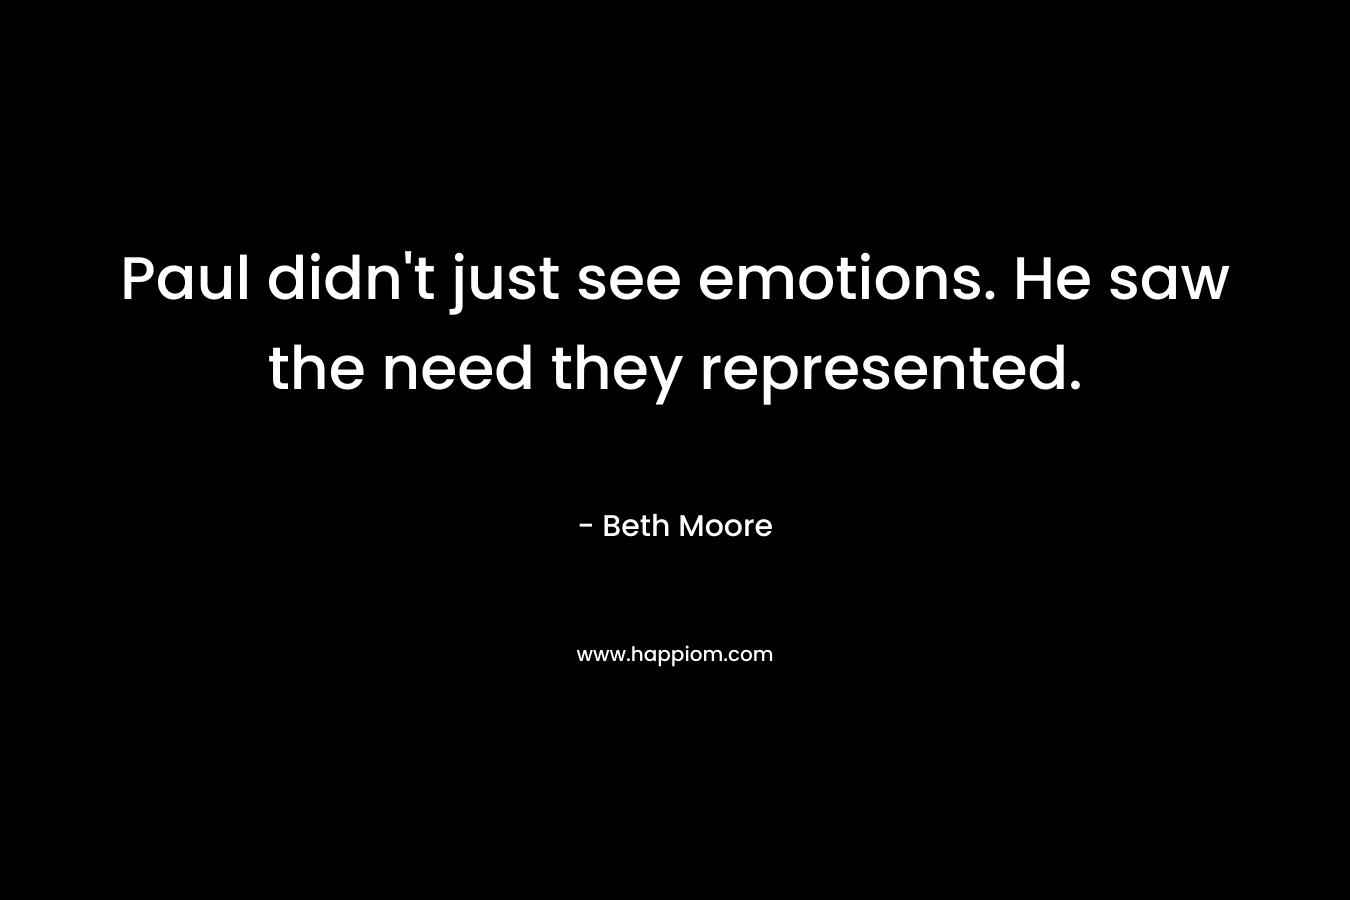 Paul didn’t just see emotions. He saw the need they represented. – Beth Moore